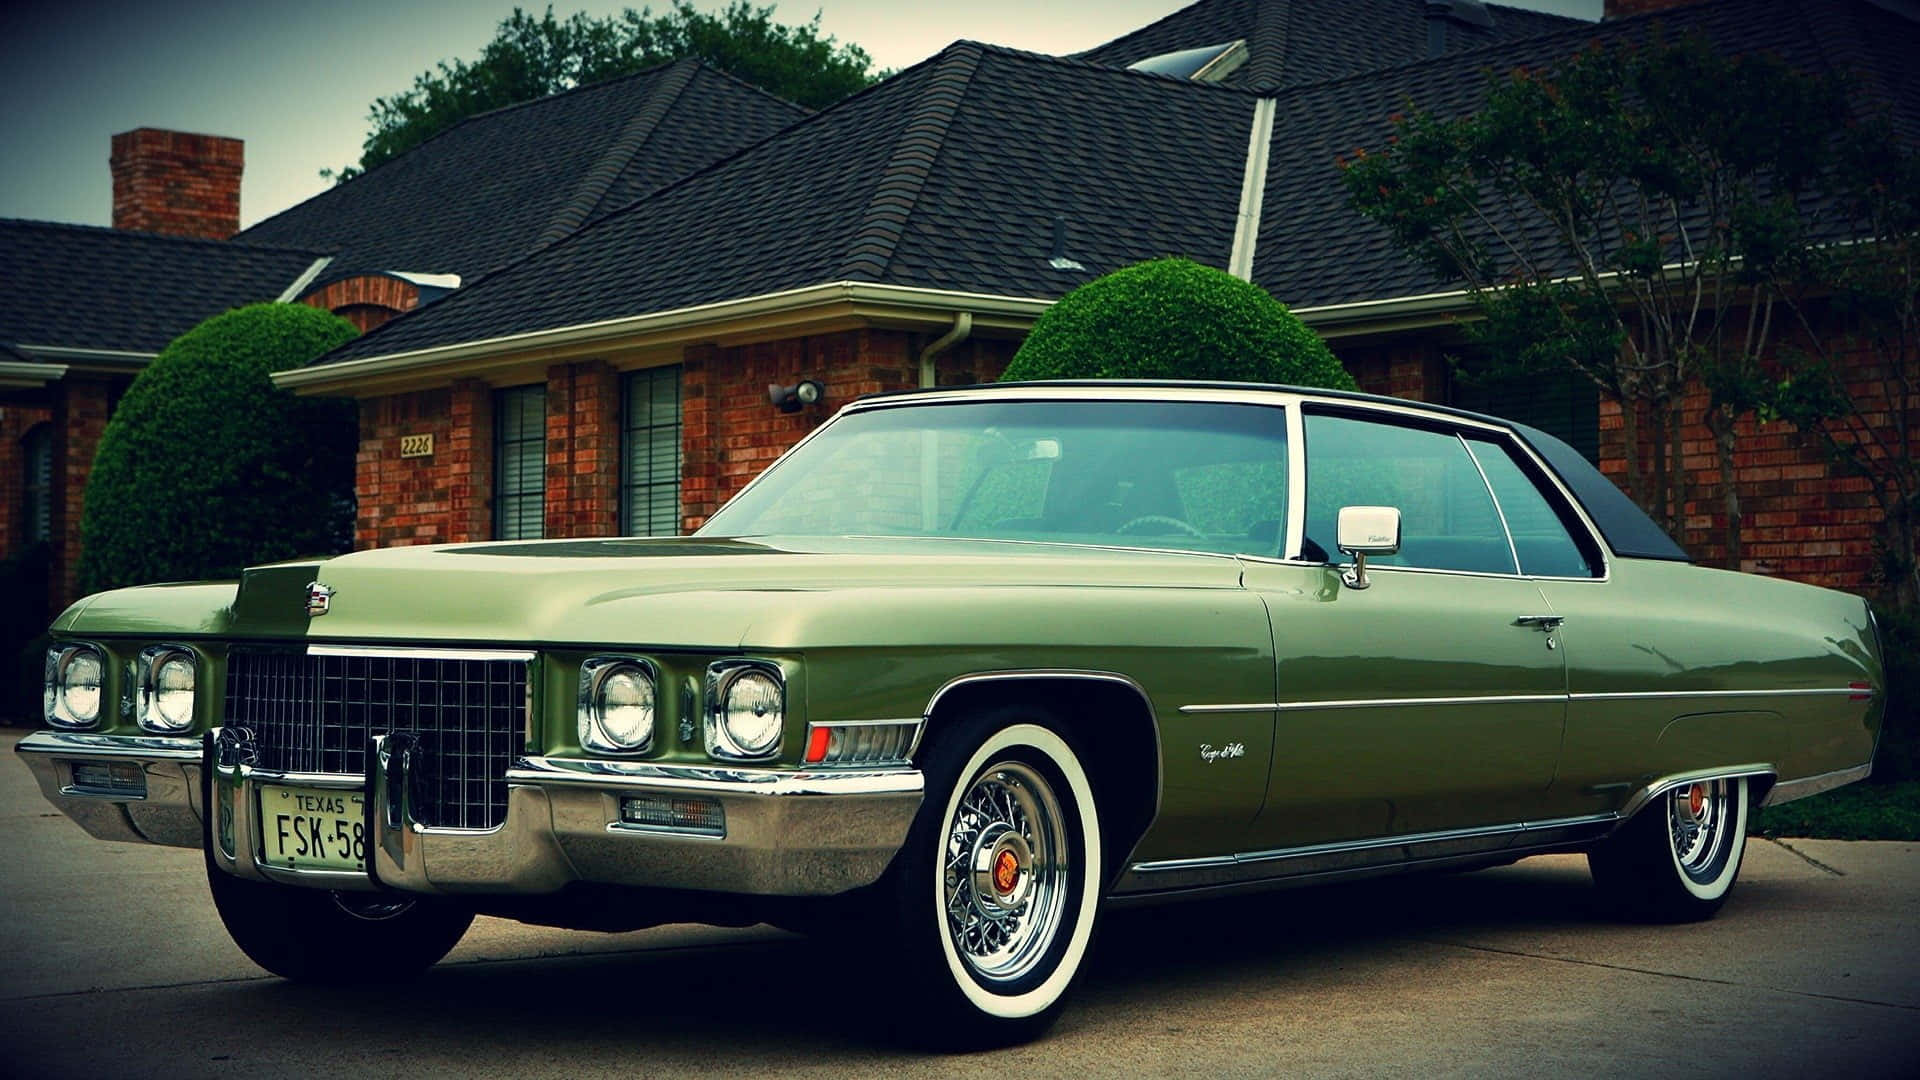 Classic Cadillac Deville in a Stunning View Wallpaper